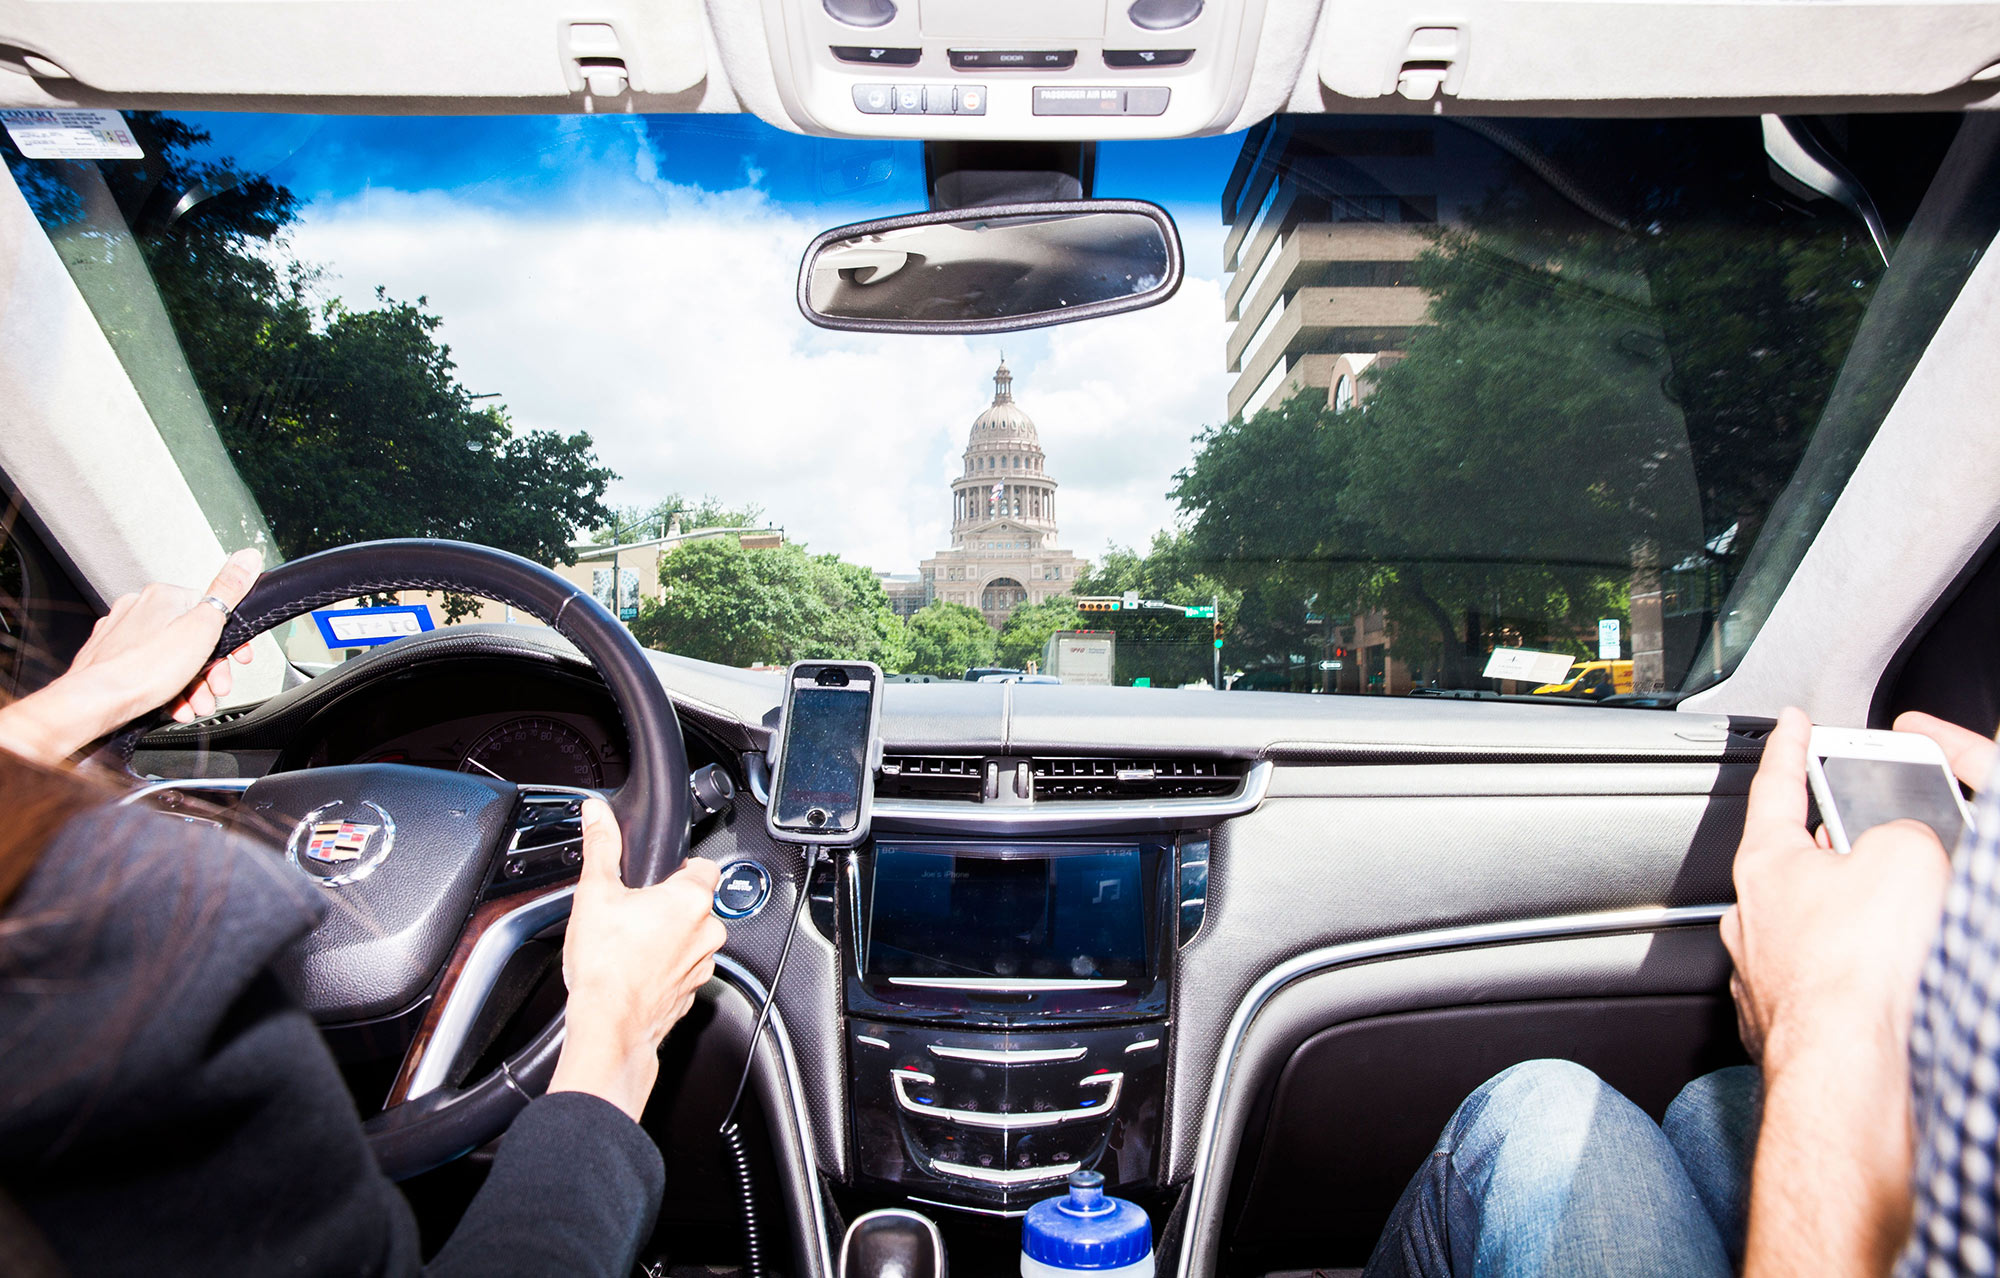 Drivers in a General Motors Co. brand Cadillac vehicle sit facing the Texas State Capitol building in Austin, Texas, U.S., on Friday, June 3, 2016. Steve Adler, Austin's mayor, thinks he can put his stamp on the city by burnishing its reputation as an exciting playground for experiments in urban transportation. One of his political priorities is to seek millions in federal funding to promote a so-called smart city plan based on autonomous buses, sensors that know which parking spaces are available and, yes, a culture of ridesharing.
